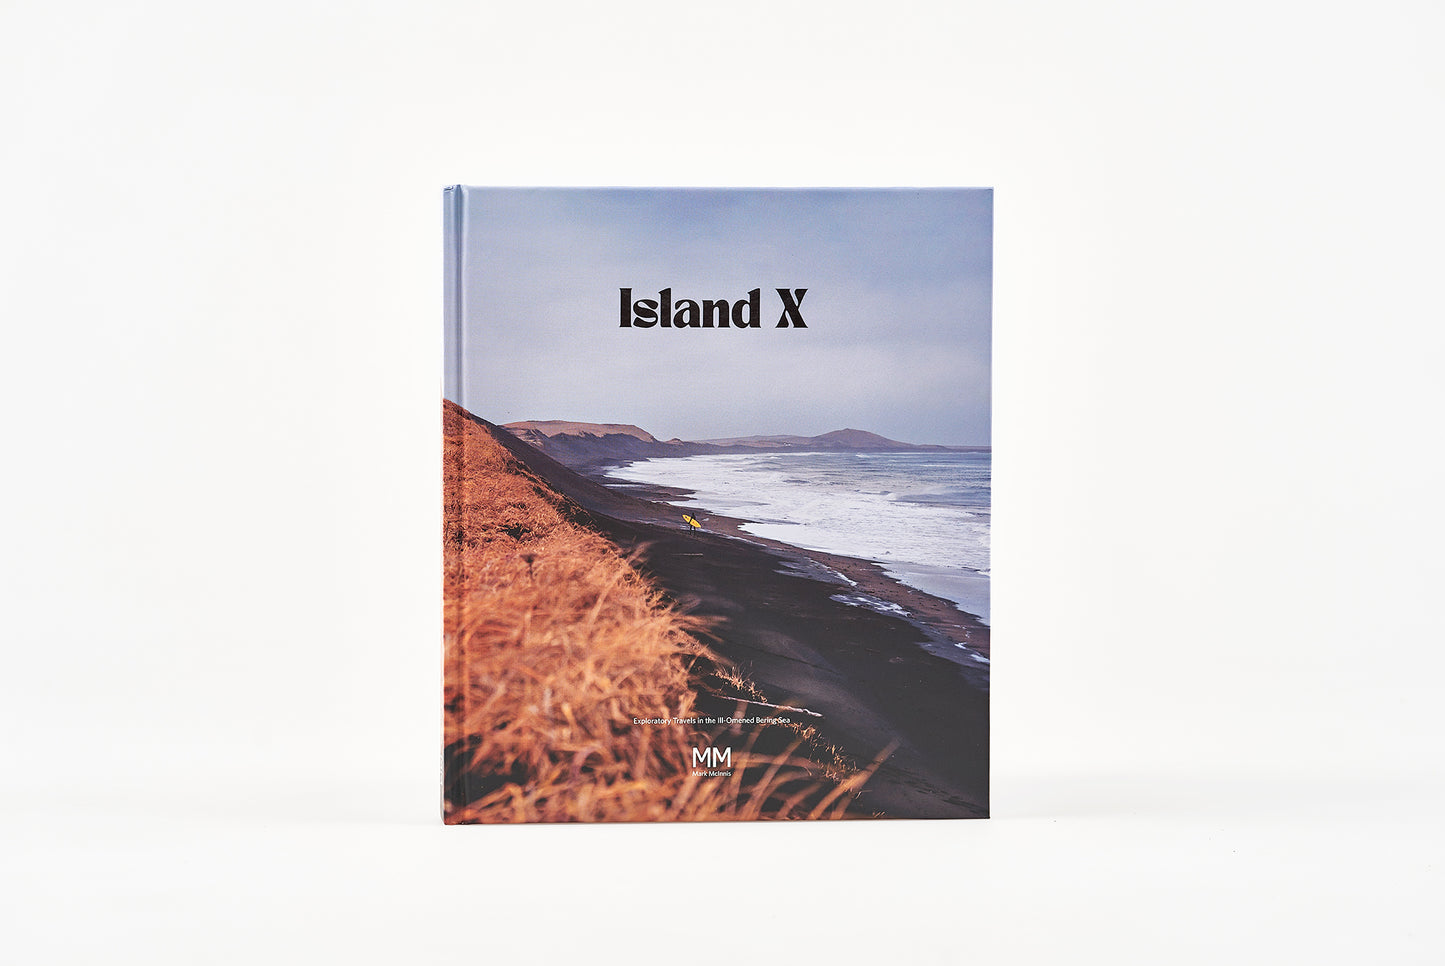 Island X- A photography book by Mark McInnis- Standard edition front cover.